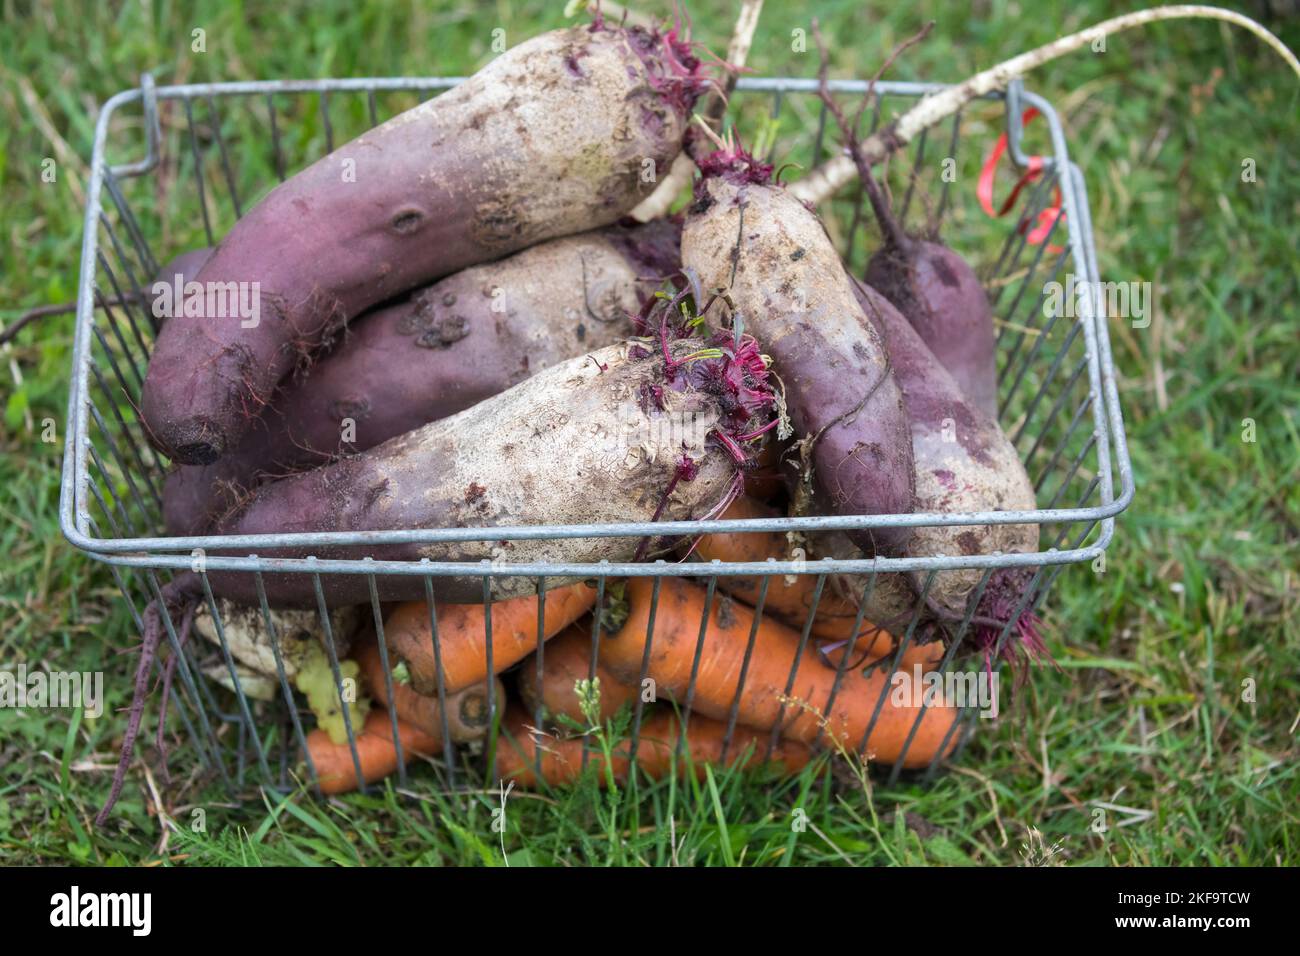 A wire basket full of freshly picked beetroots and carrots placed on the grass Stock Photo